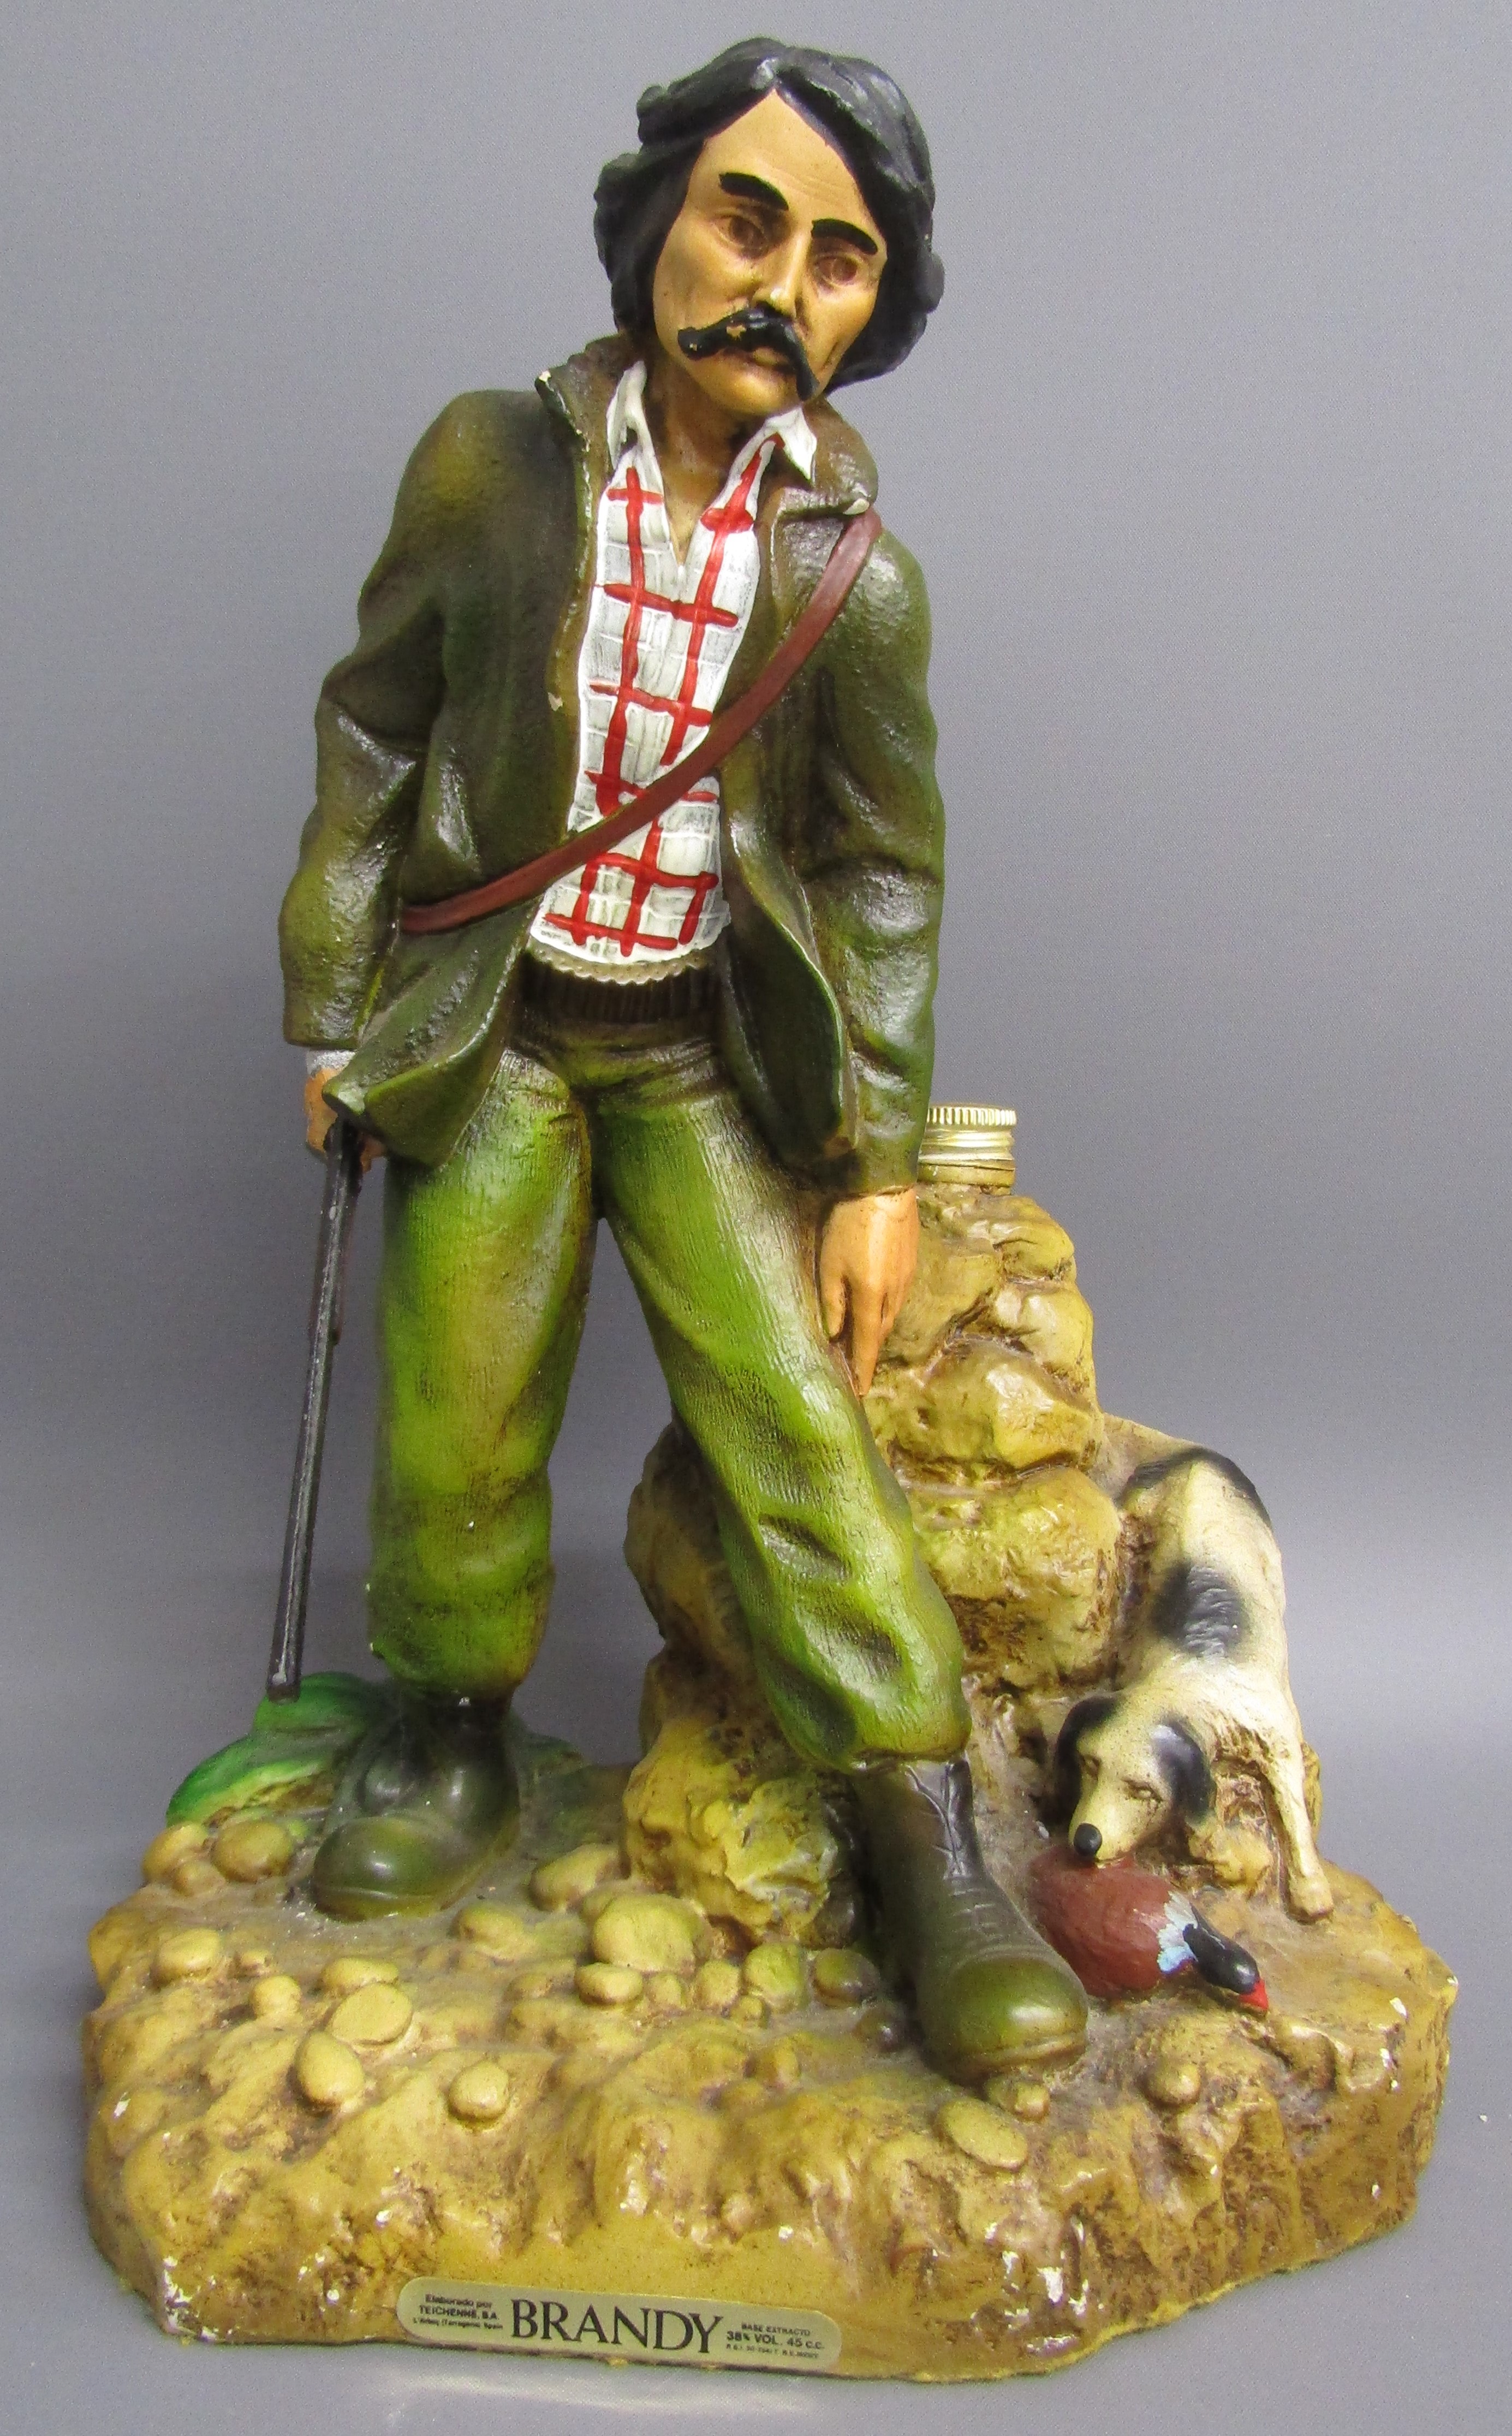 Teichenne figural brandy bottles - Napoleon and Shoot dog and man also Gran Reserve brandy ' - Image 4 of 5